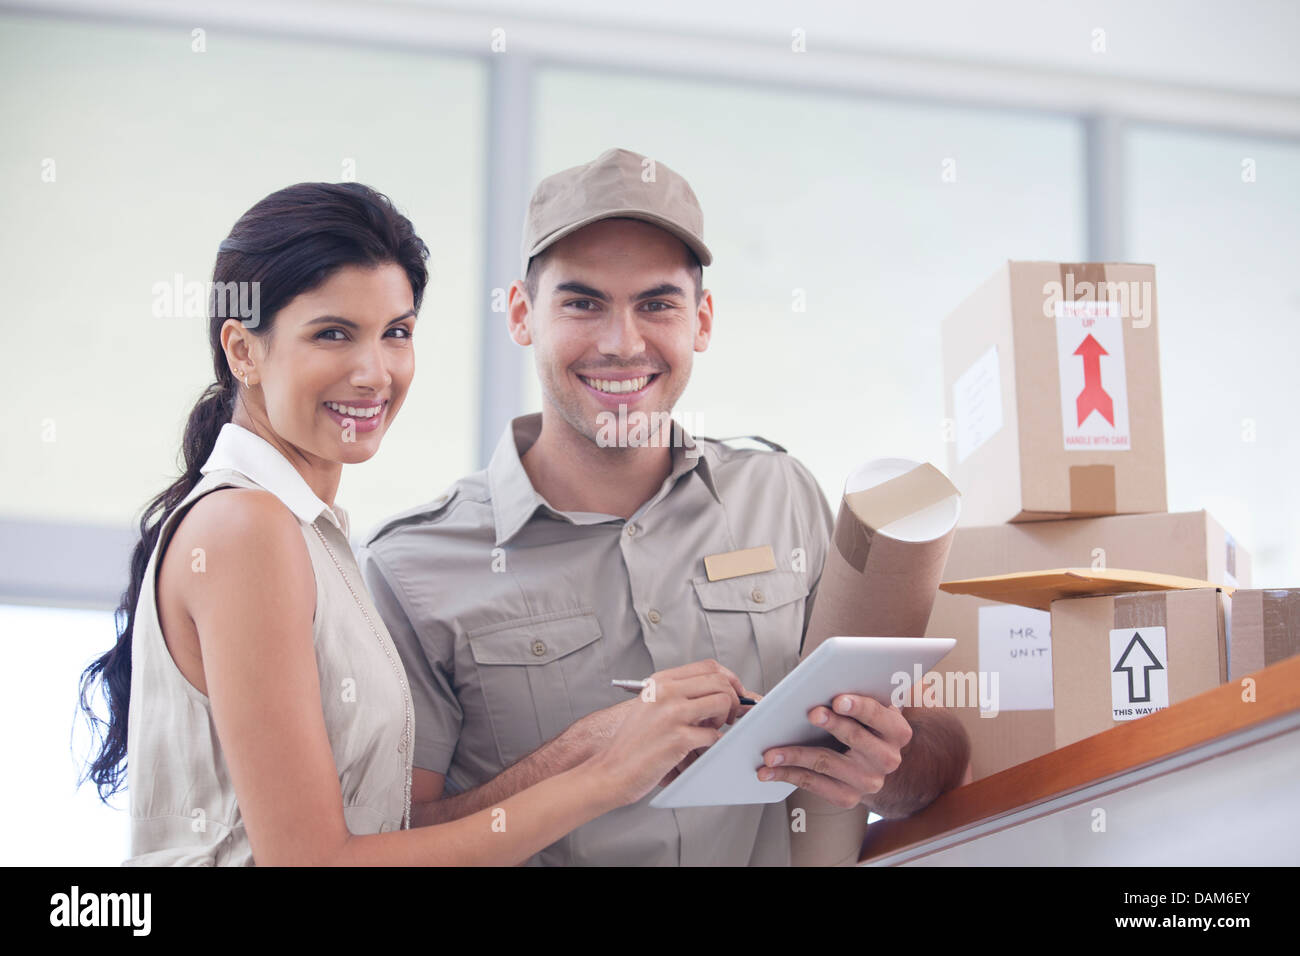 Woman signing for packages from delivery boy Stock Photo